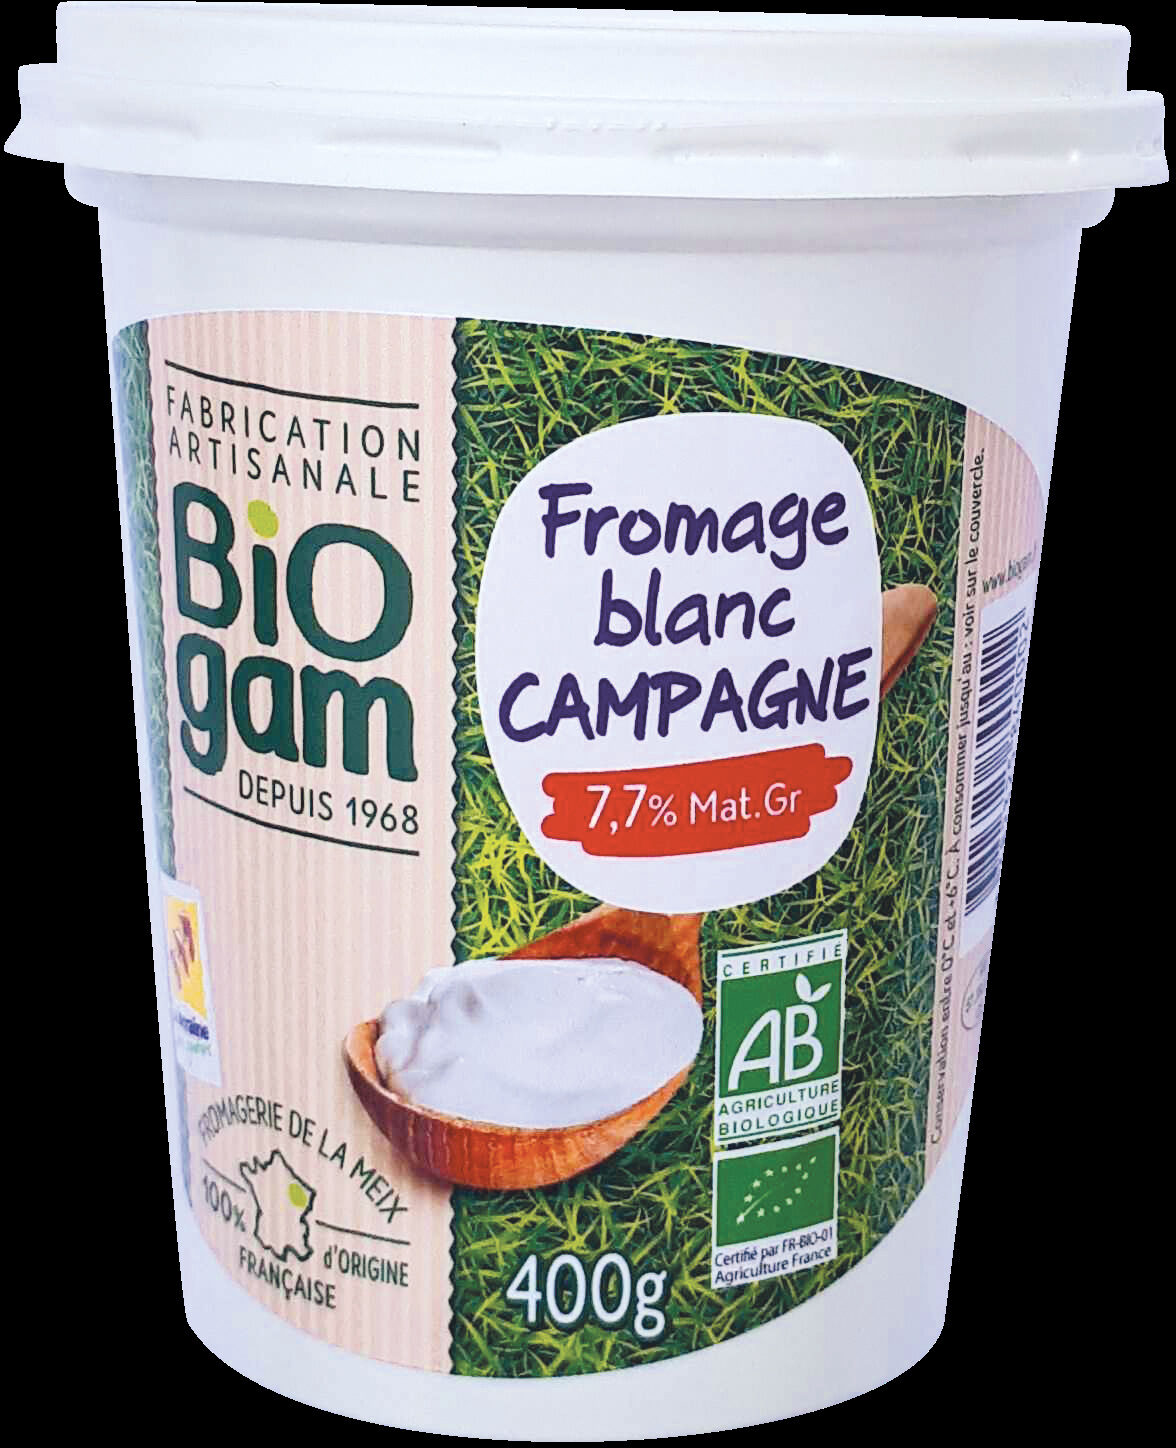 Fromage blanc Campagne BIO - Product - fr